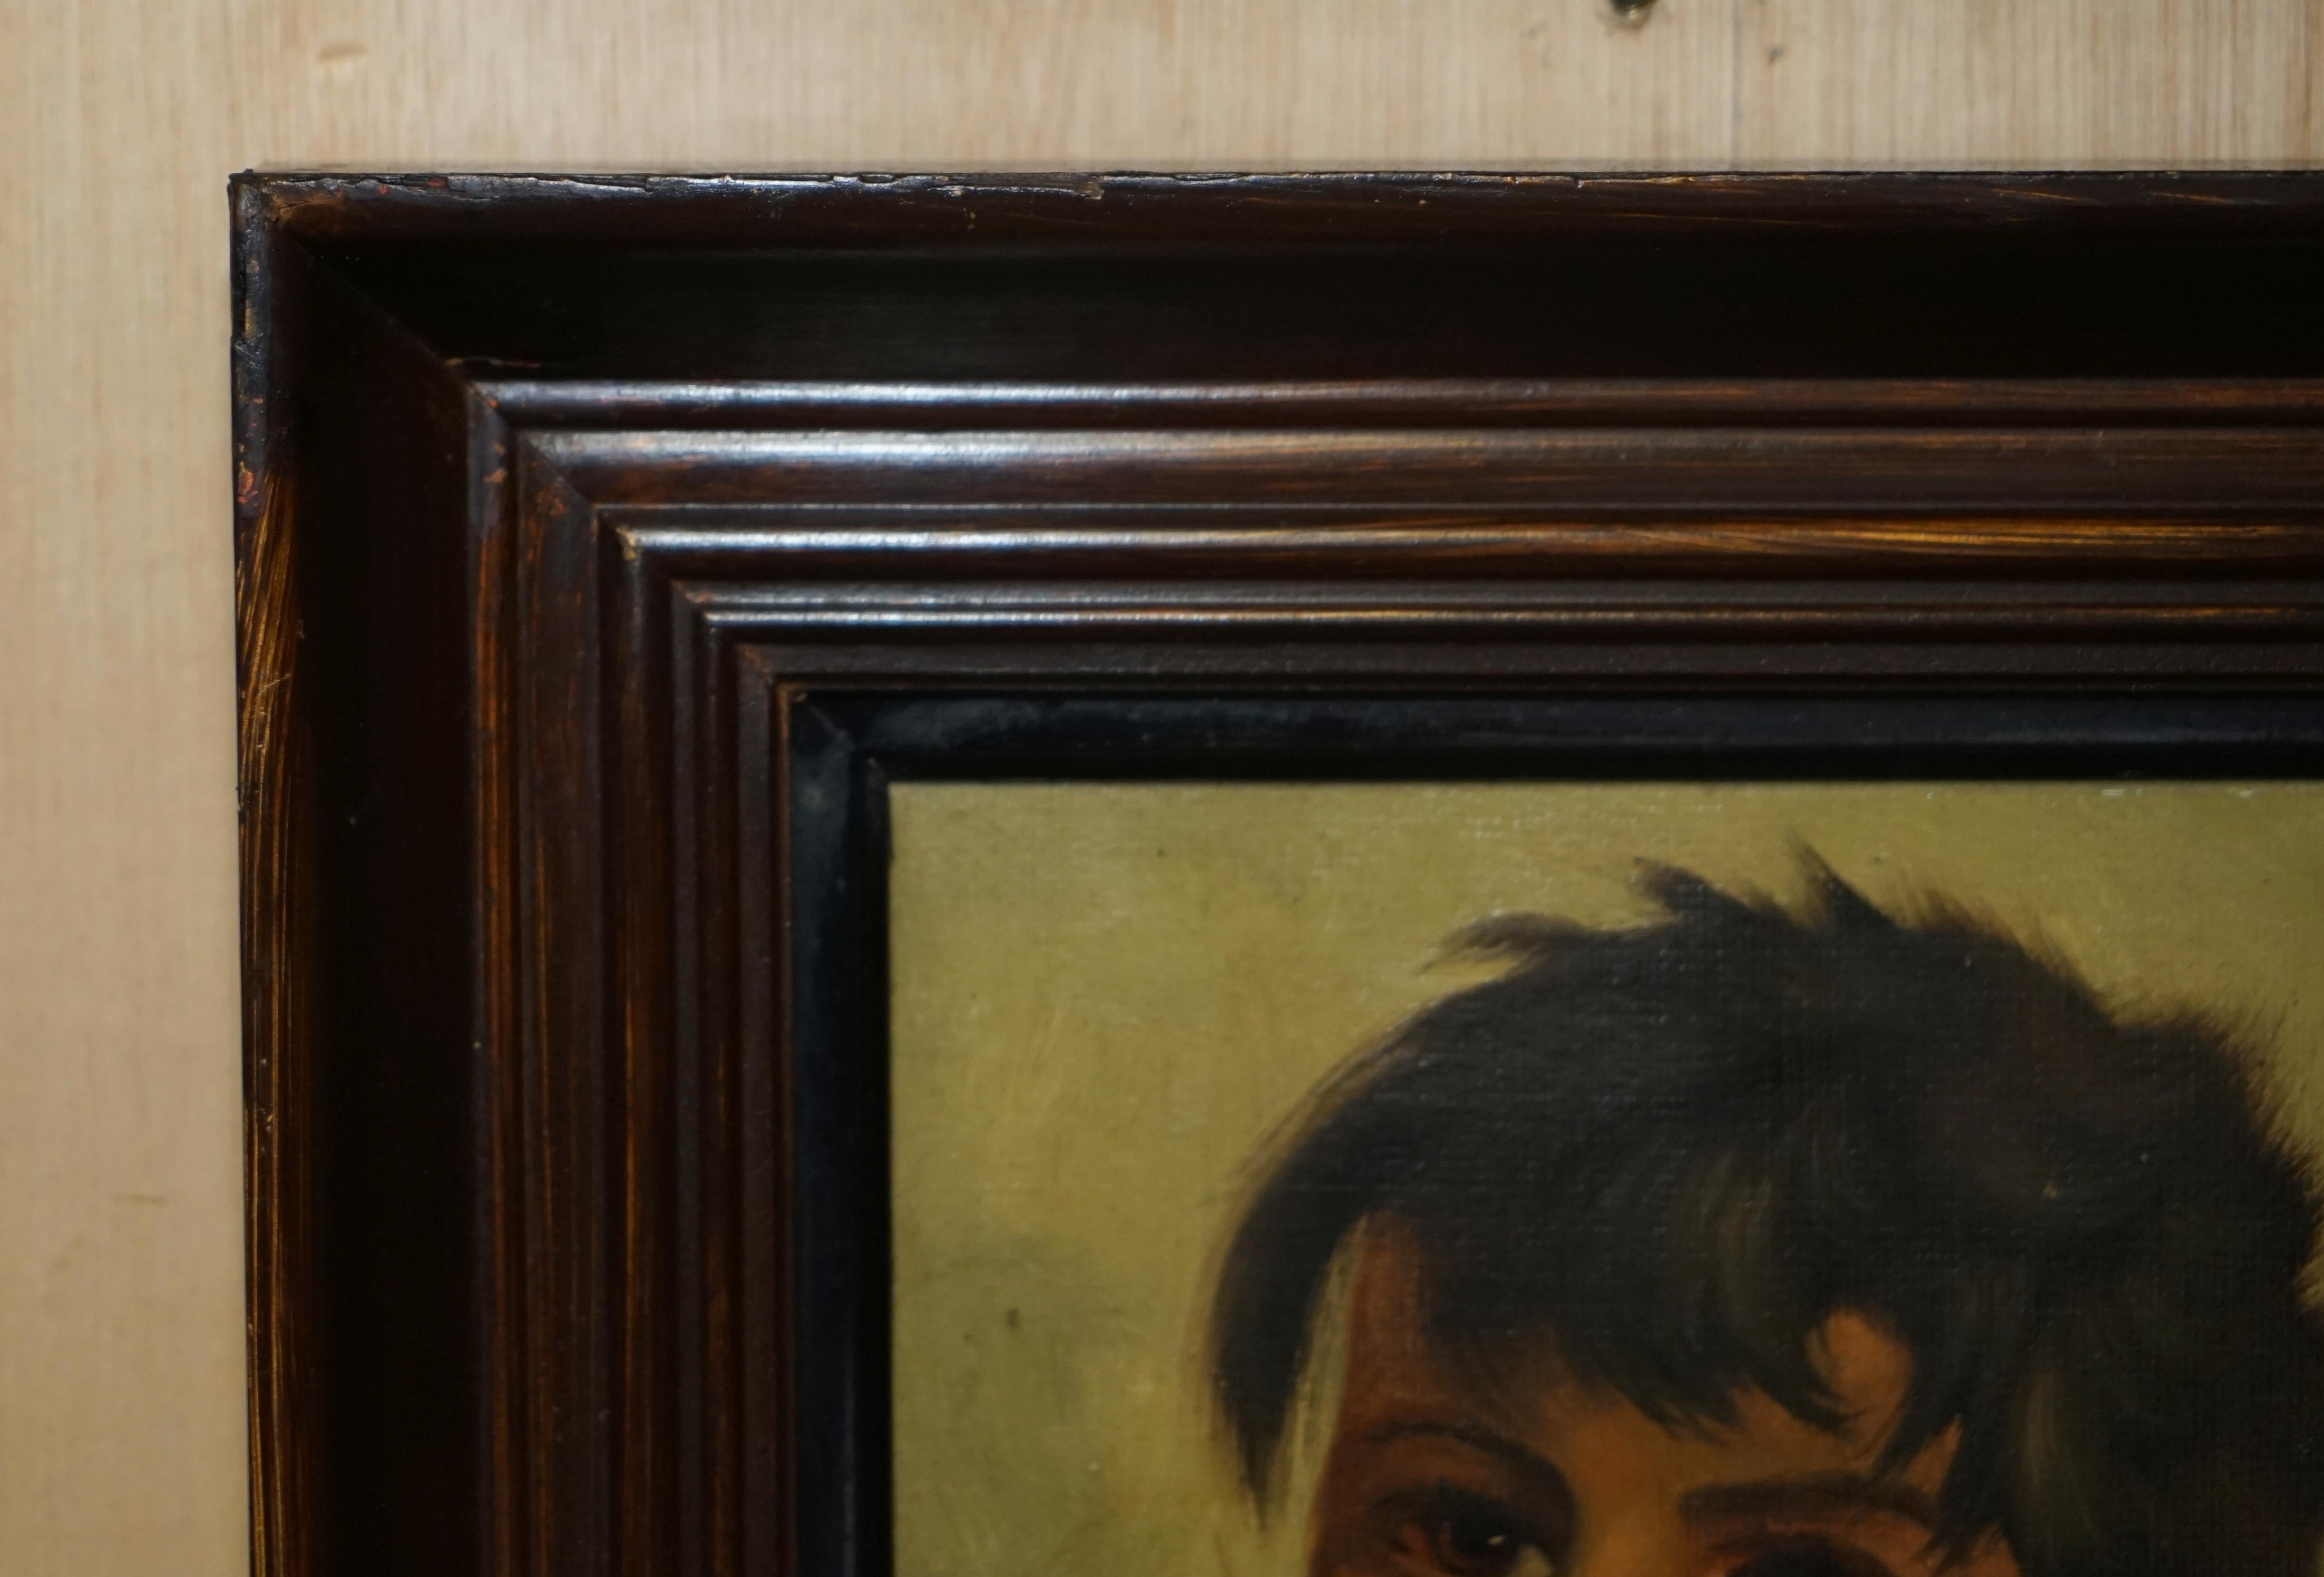 We are delighted to offer for sale this lovely original circa 1930's Belgium oil on canvas of young boy smoking which is part of a suite

Please note the delivery fee listed is just a guide, it covers within the M25 only for the UK and local